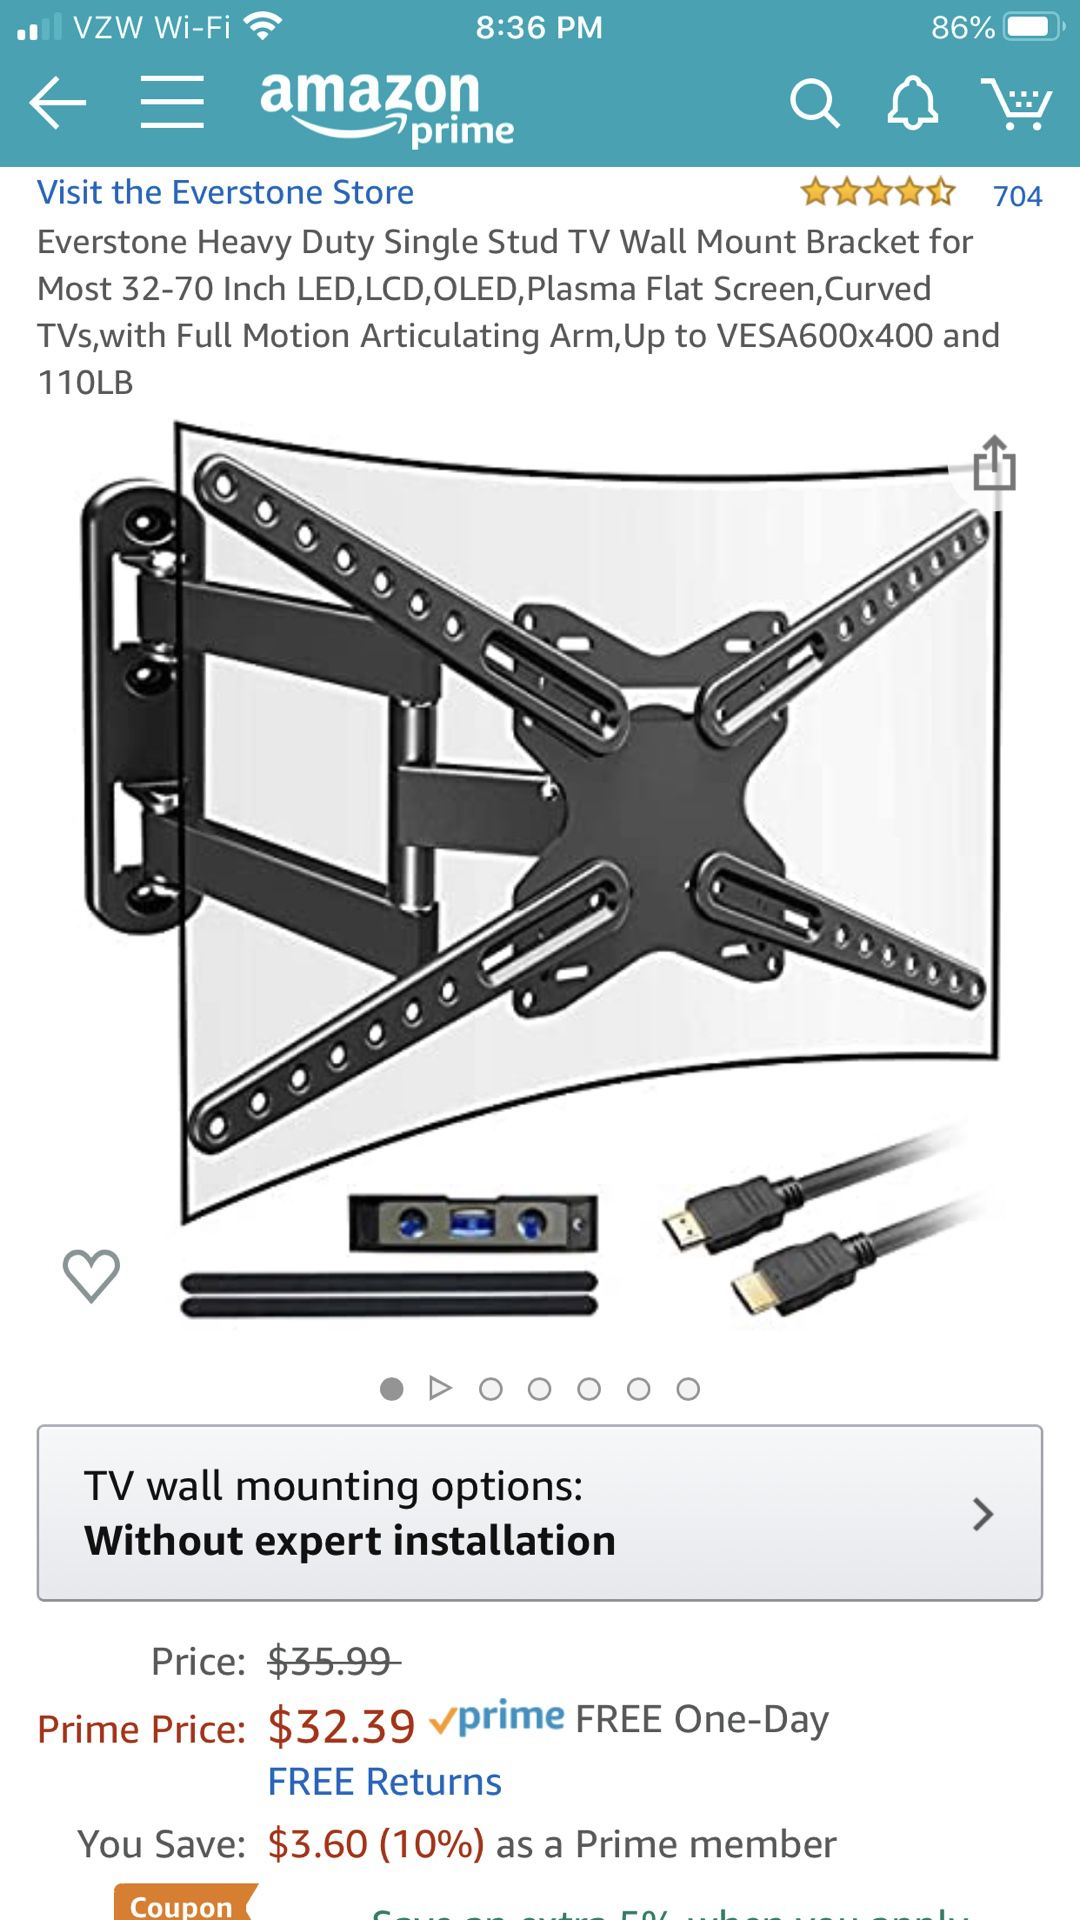 Everstone Heavy Duty Single Stud TV Wall Mount Bracket for Most 32-70 Inch LED,LCD,OLED,Plasma Flat Screen,Curved TVs,with Full Motion Articulating A